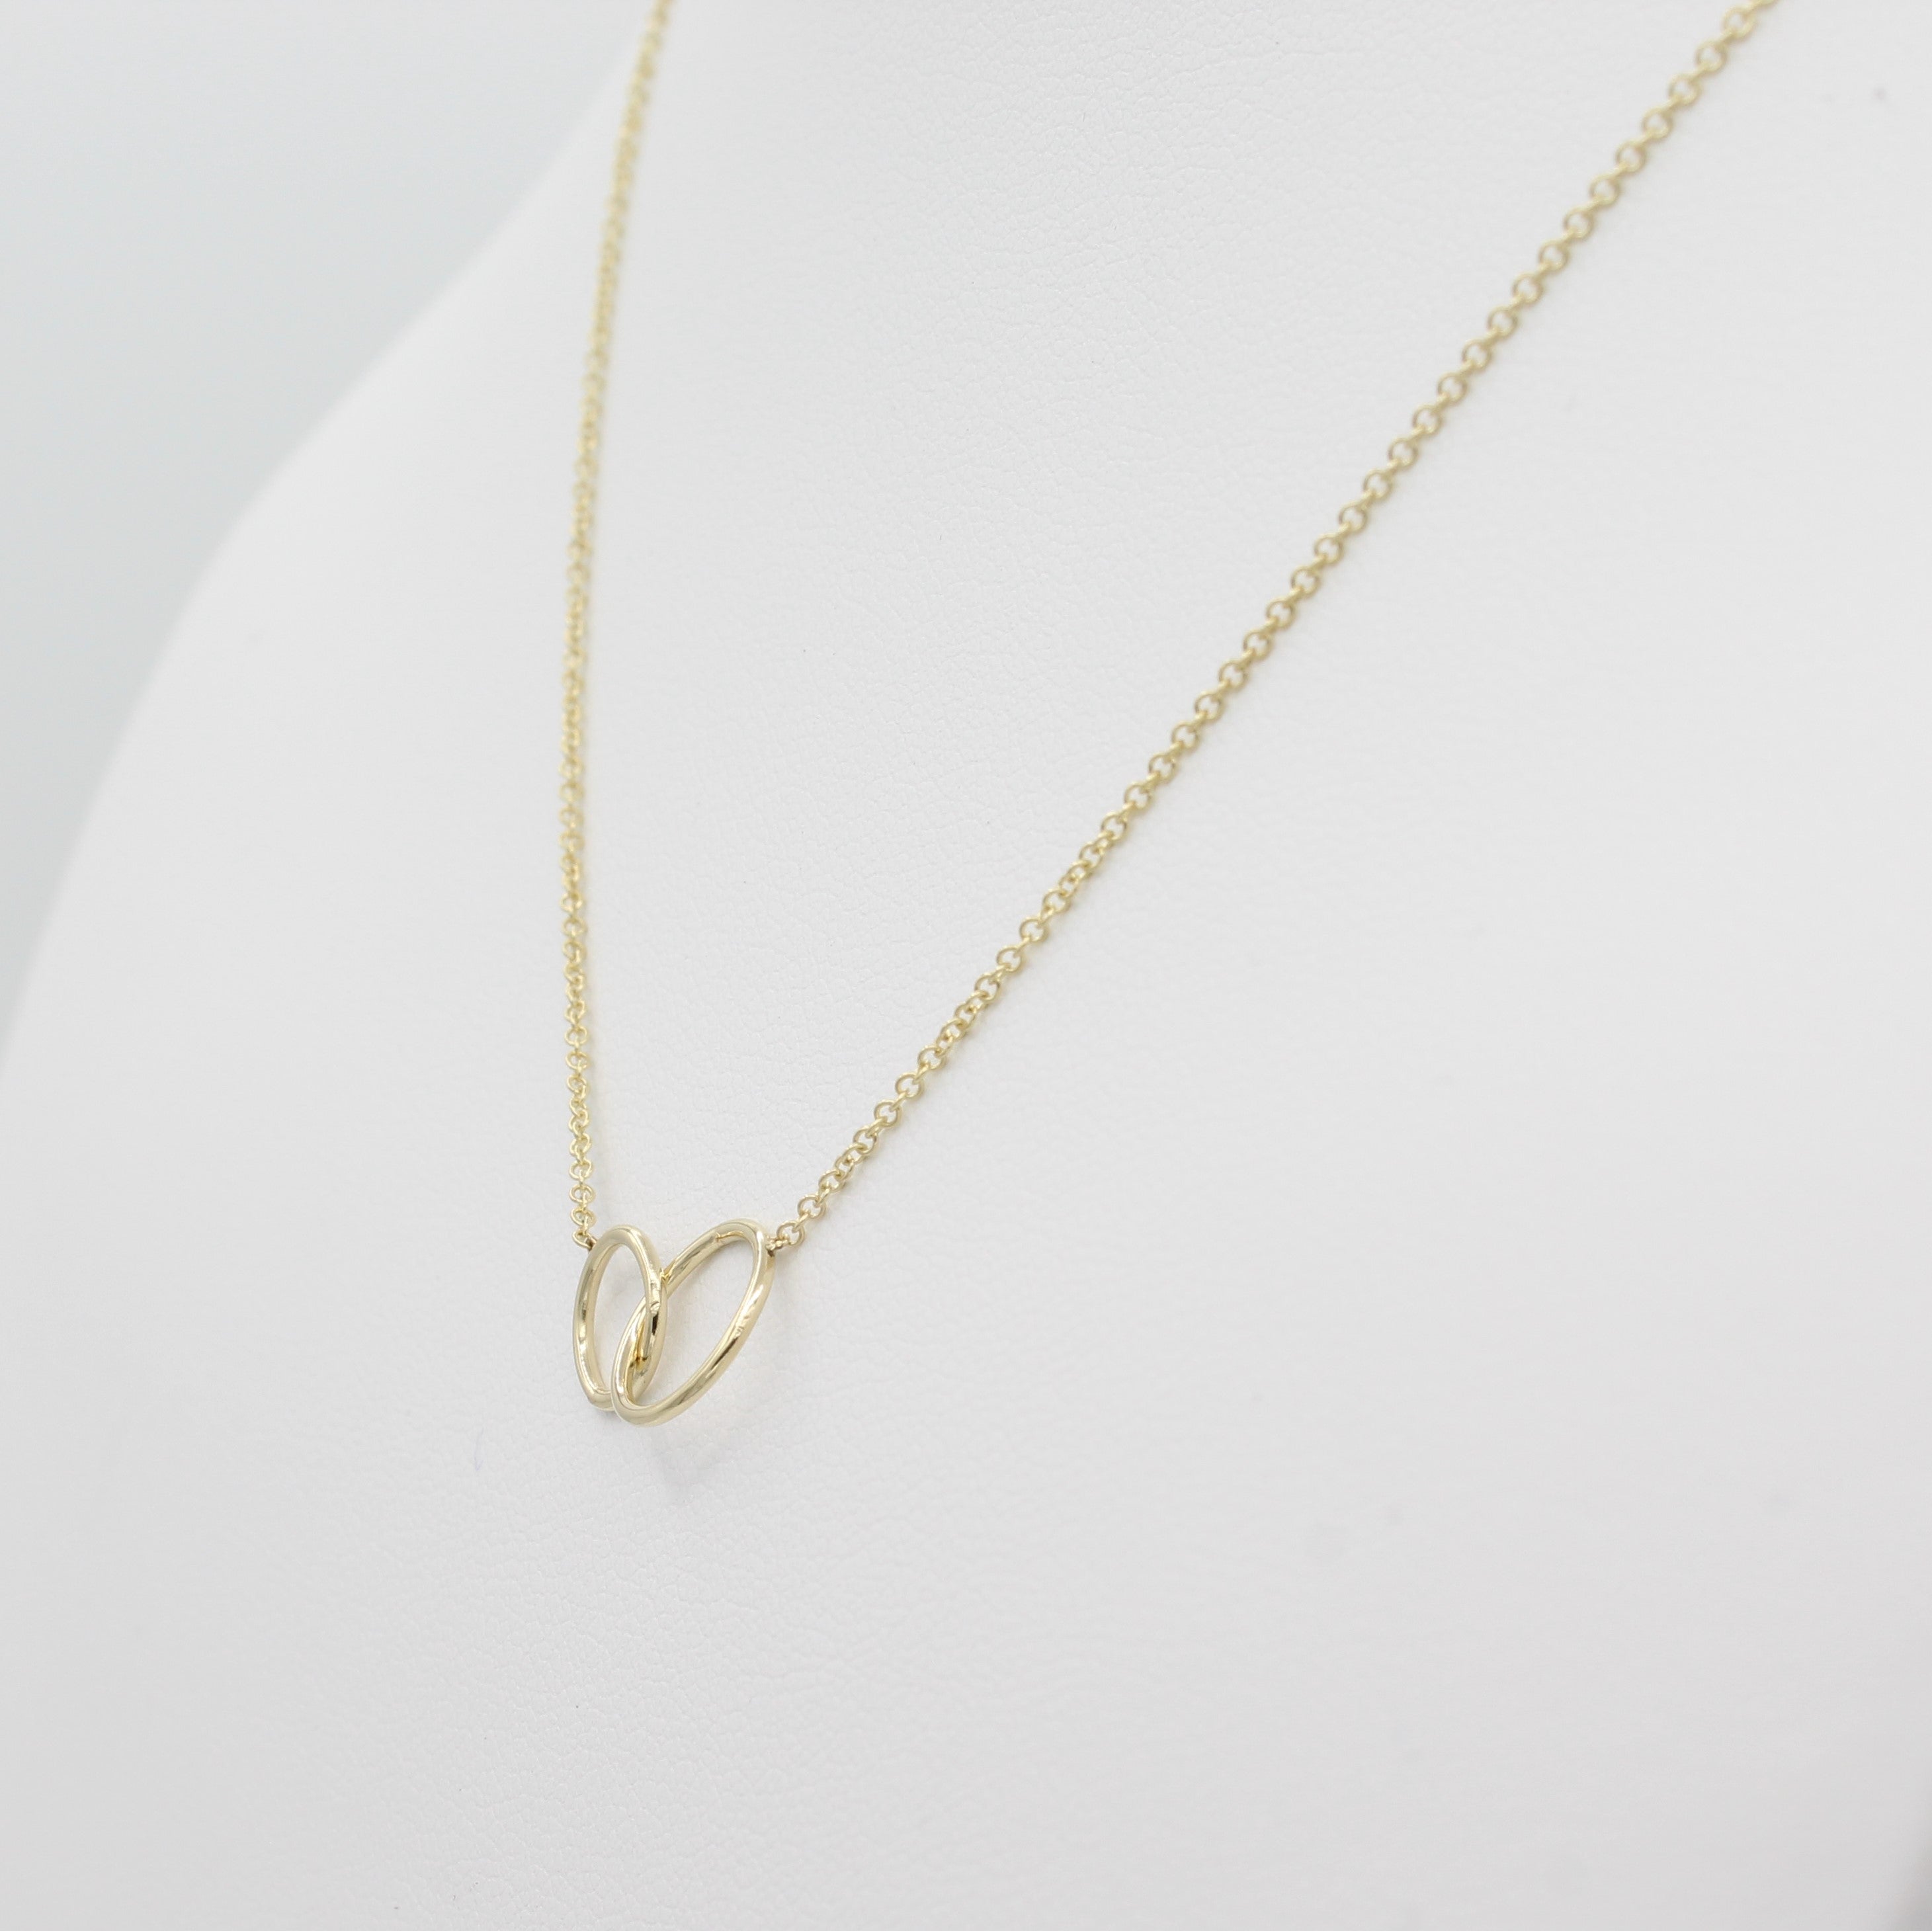 Dainty Linked Open Circle Necklaces, 14K Gold Filled or Sterling Silver